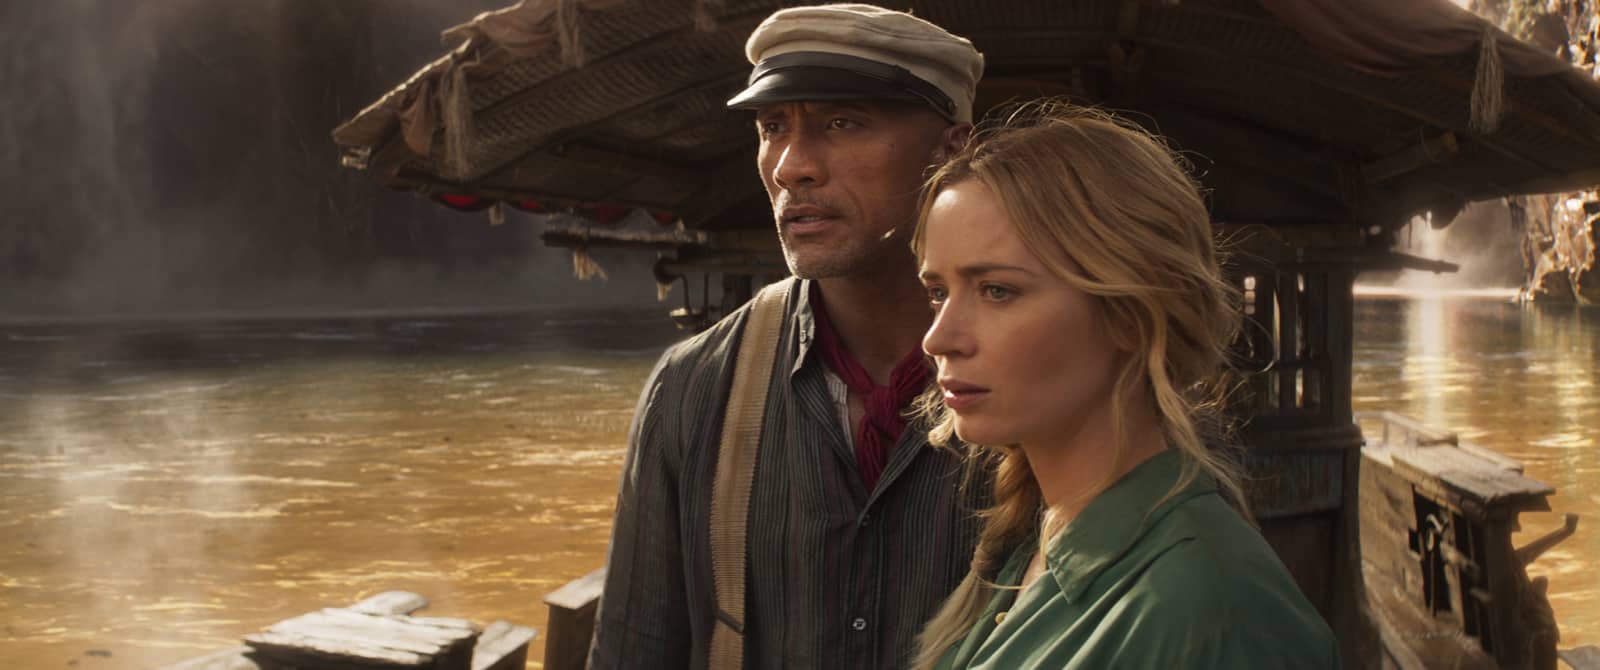 : Dwayne Johnson and Emly Blunt in “Jungle Cruise.” CREDIT: Disney+/TNS. For 'Jungle Cruise' movie review